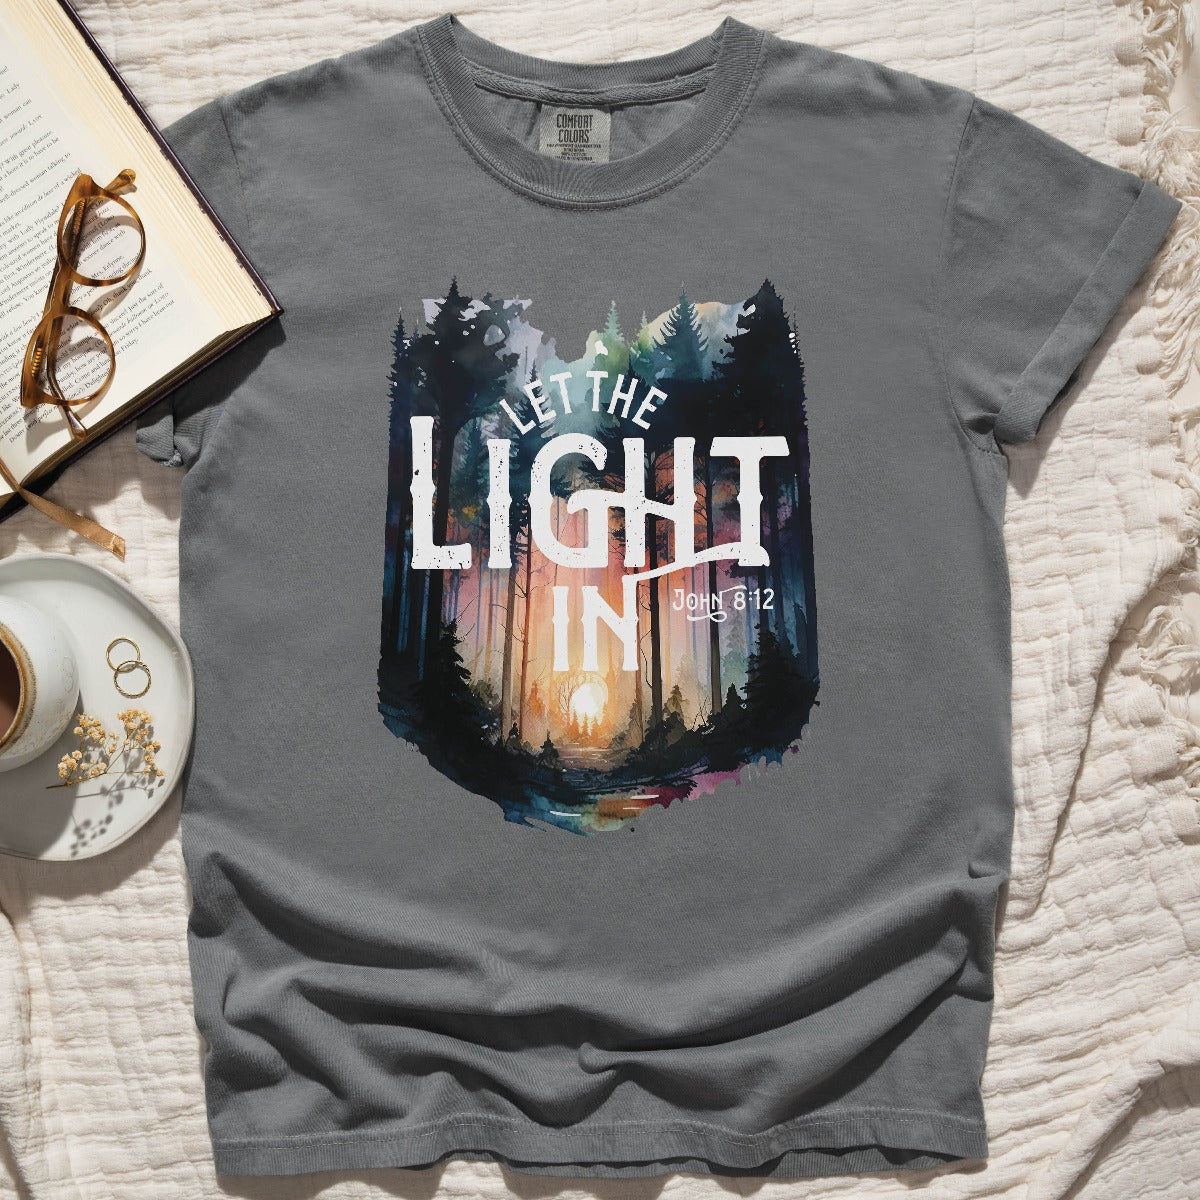 Distressed gray garment dyed Comfort Colors C1717 unisex faith-based Christian t-shirt with "Let the Light In" John 8:12 bible verse and watercolor moody forest trees scene, designed for men and women